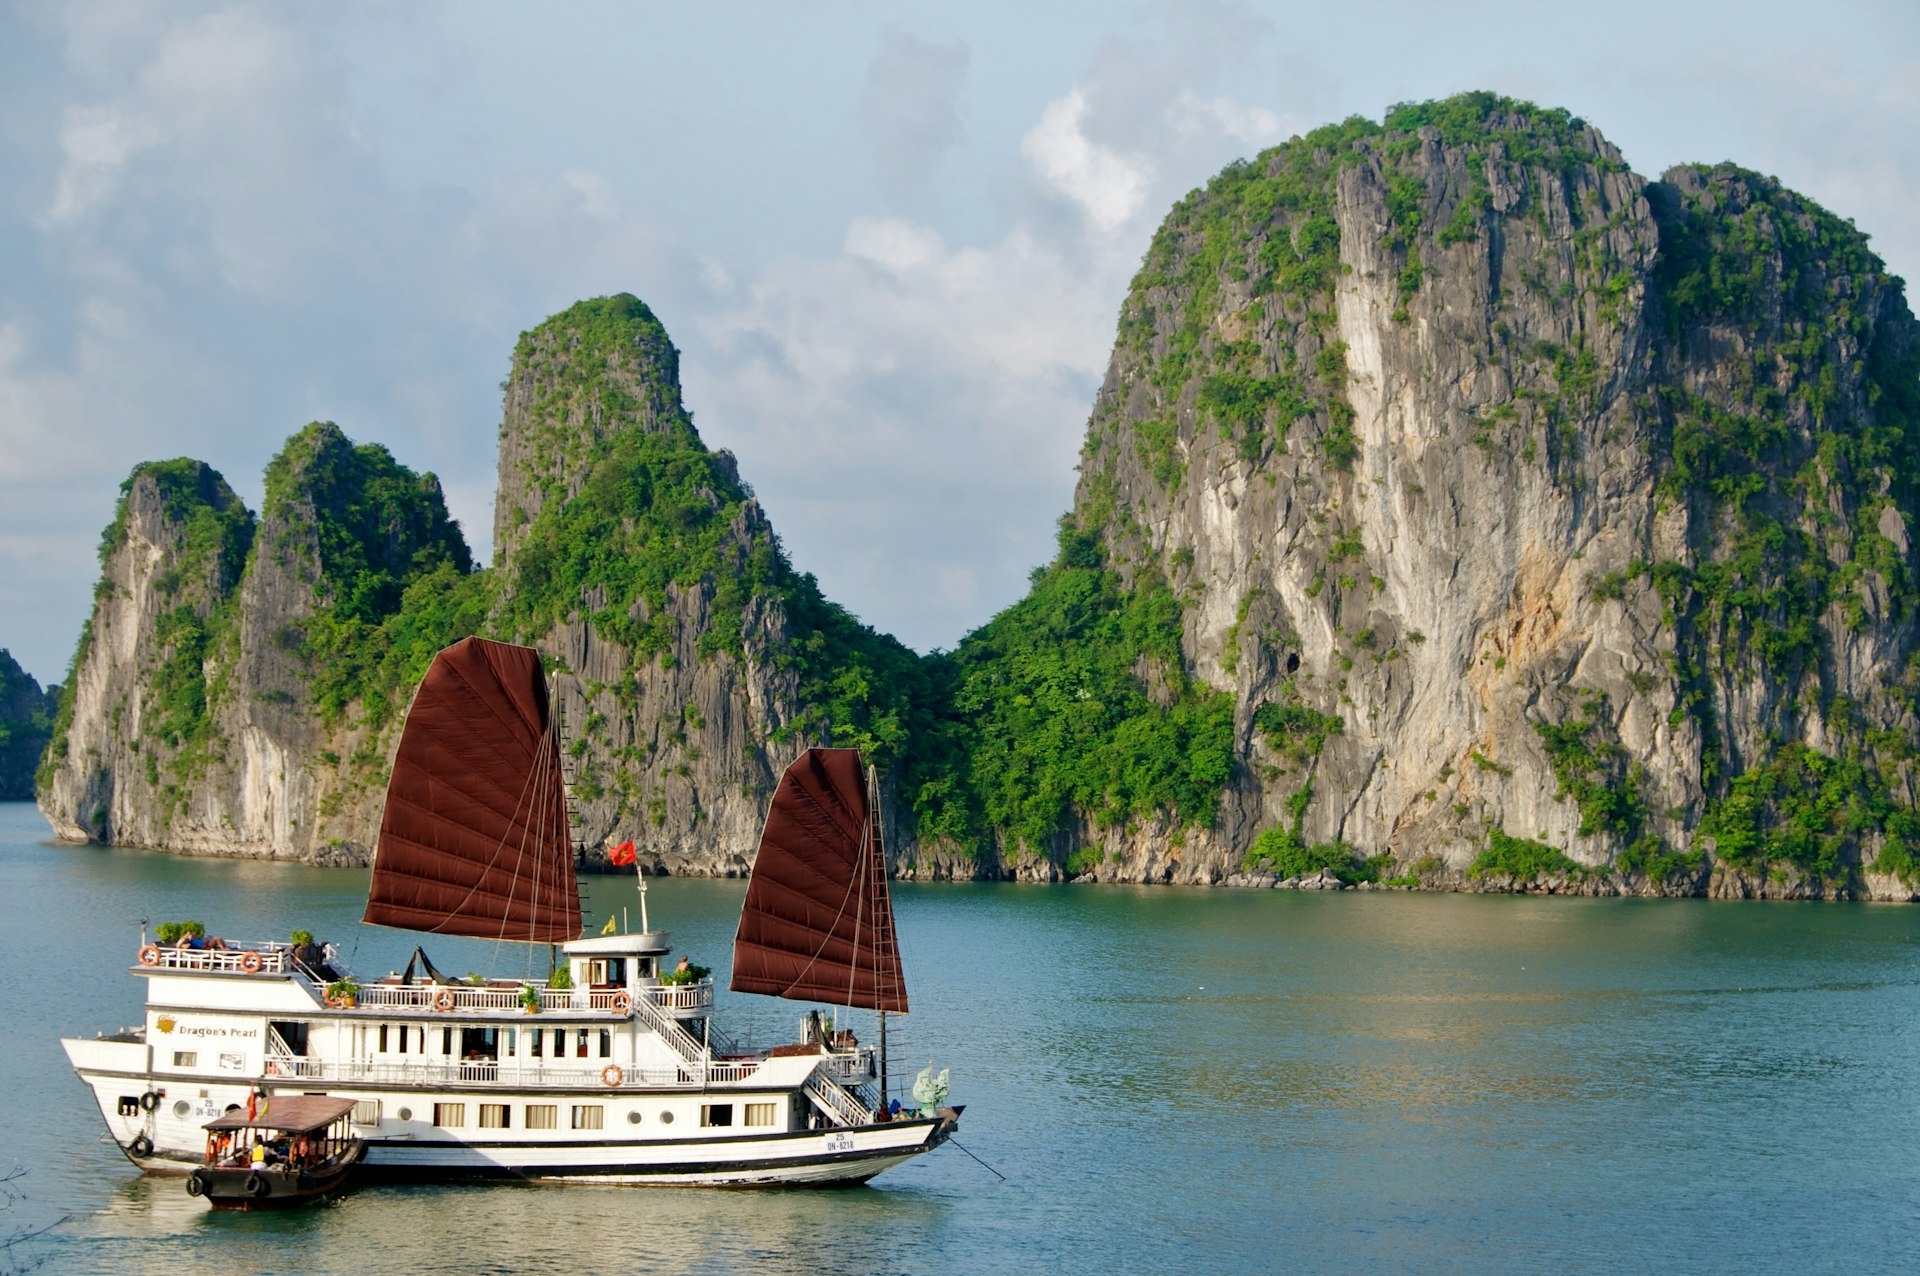 A cruise ship with two large red sails in a bay with several large limestone islets